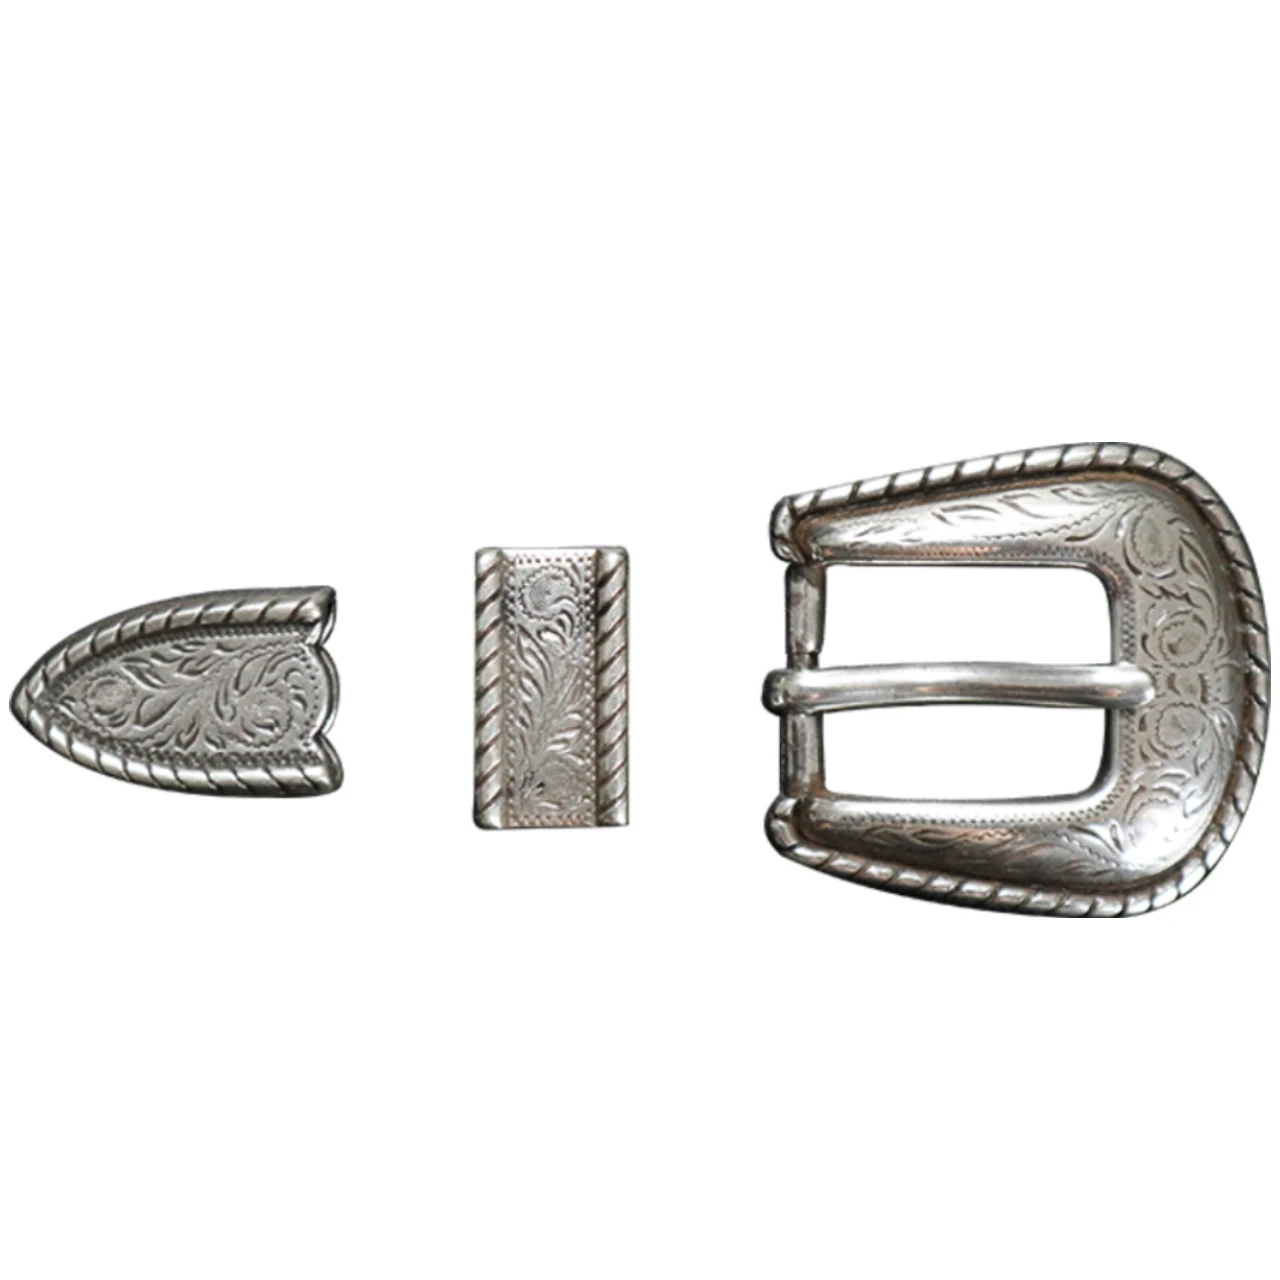 TOOLS OF THE TRADE WESTERN COWBOY BELT BUCKLE DETAILED NEW! 